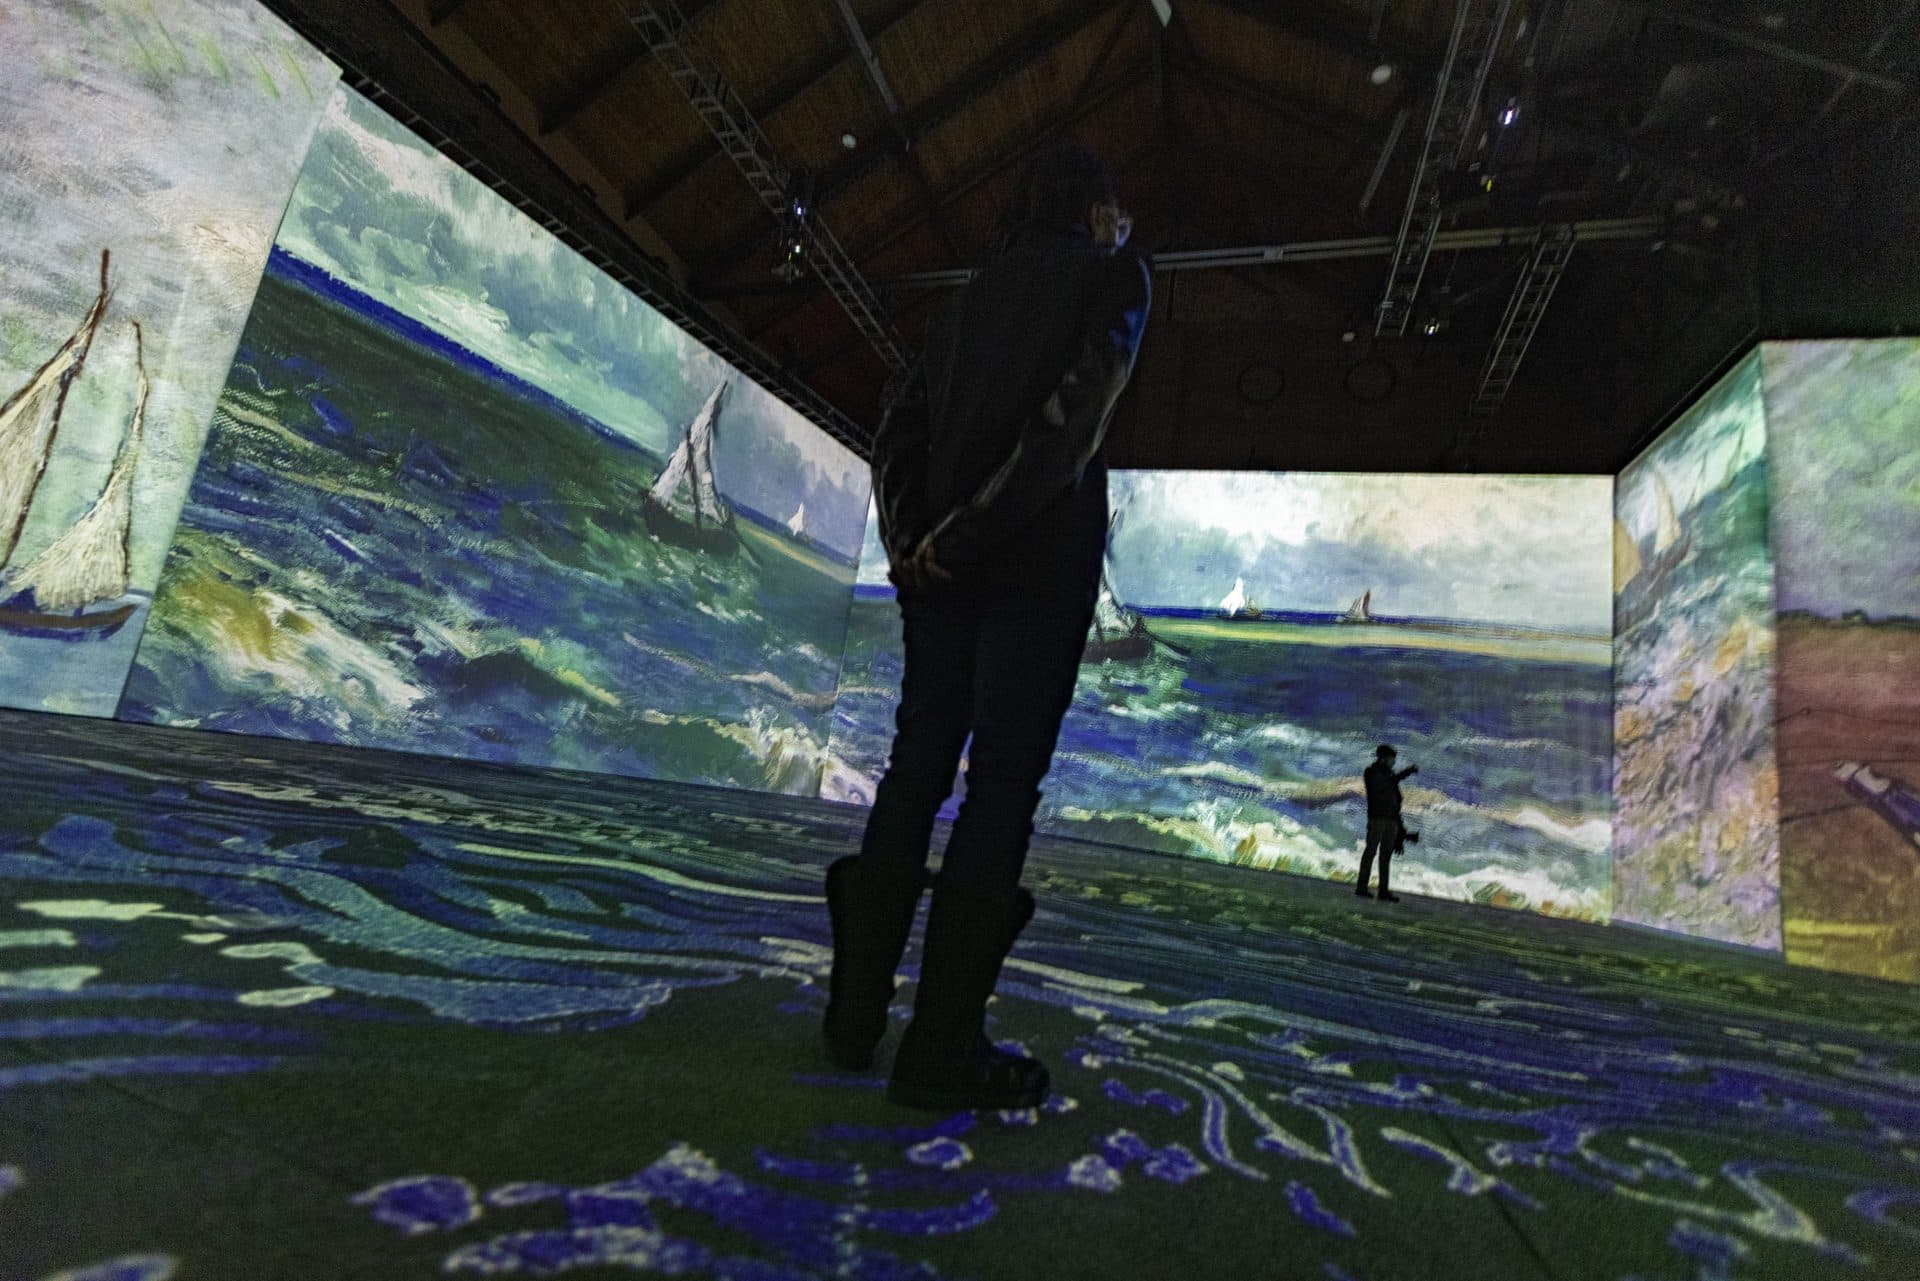 Vincent van Gogh’s “Seascape near Les Saintes-Maries-de-la-Mer” is projected onto the walls and floor during a press preview of “Imagine Van Gogh” at the SoWa Power Station in the South End. (Jesse Costa/WBUR)